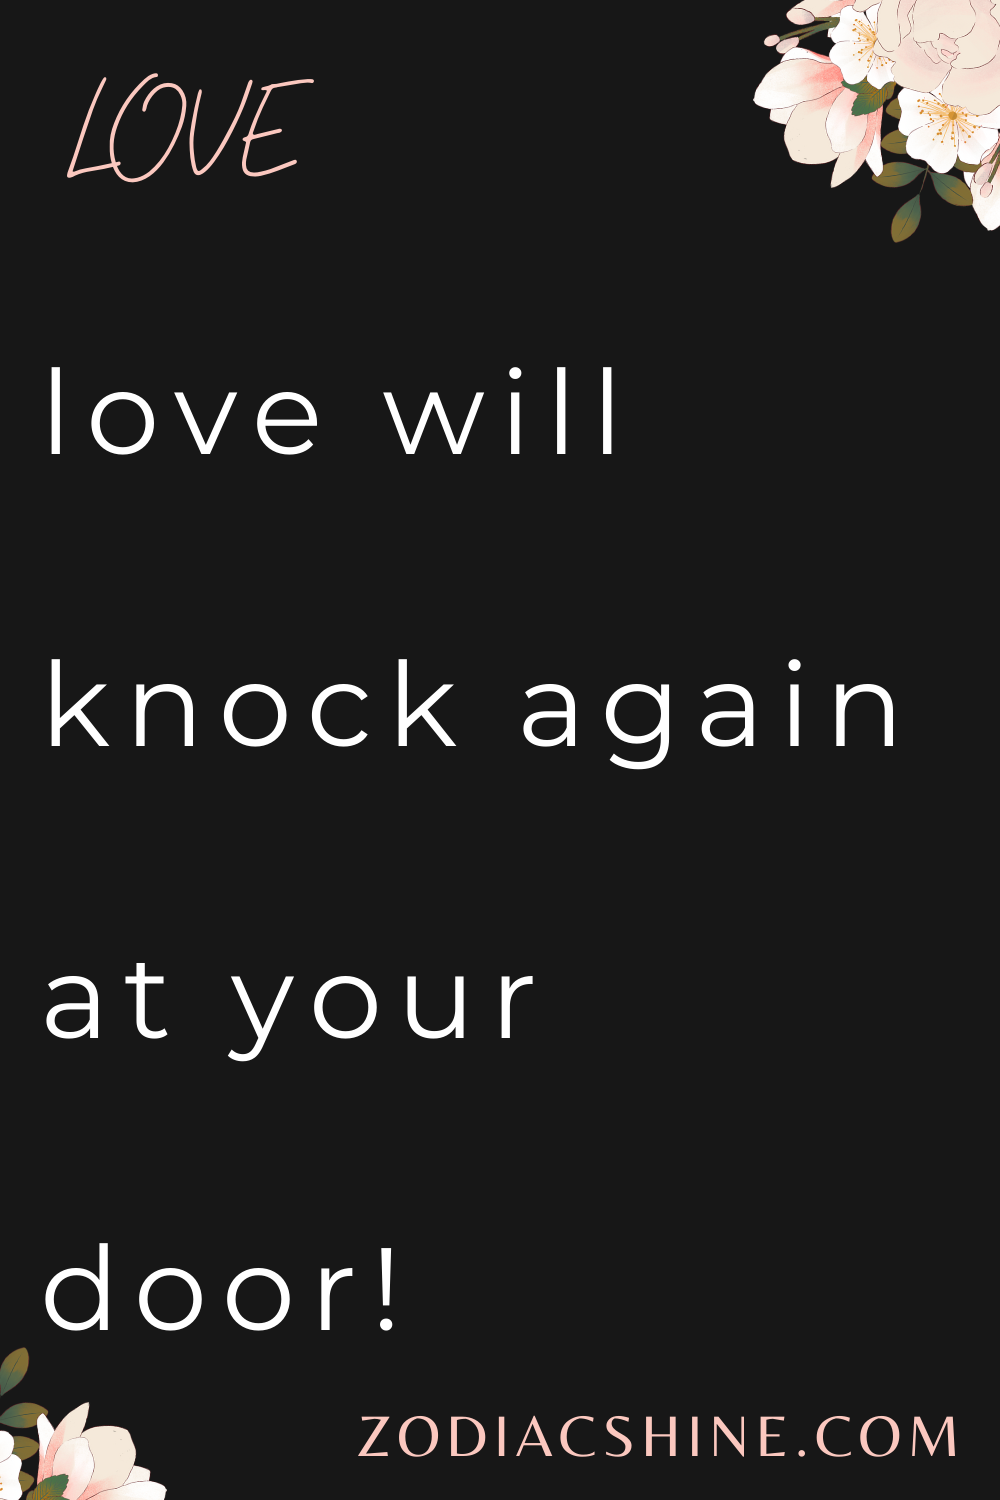 love will knock again at your door!